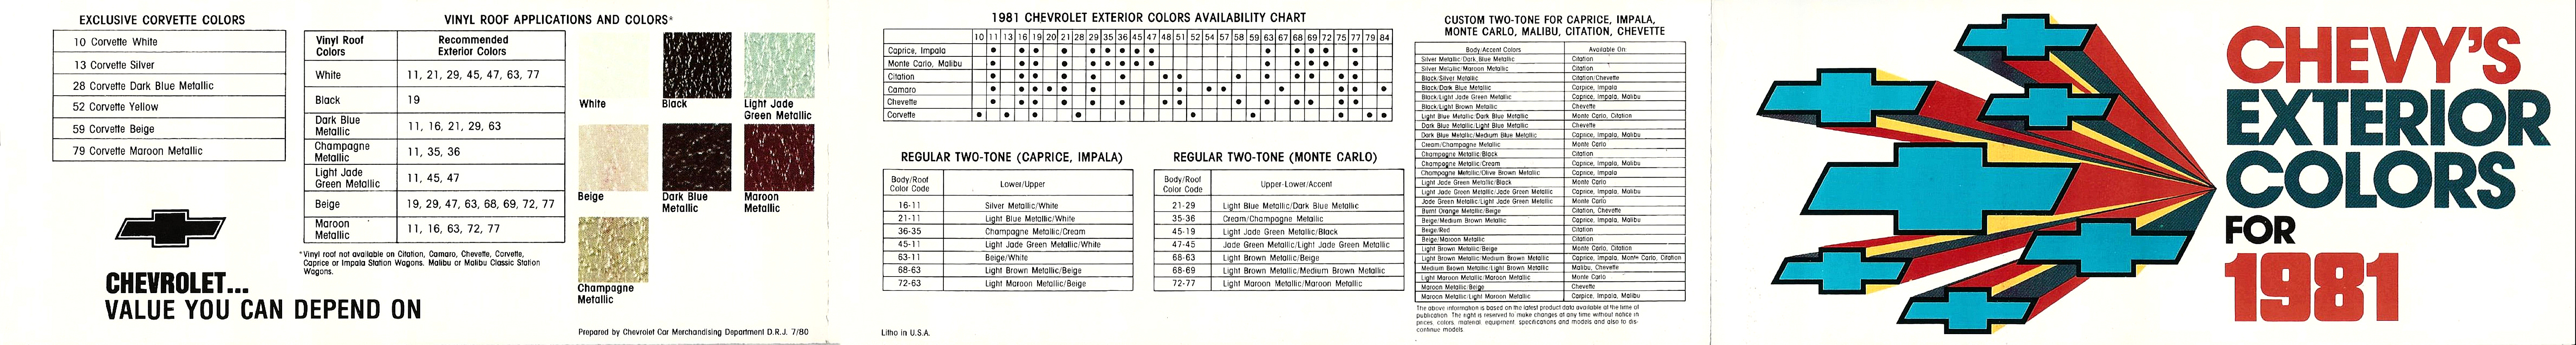 1981_Chevrolet_Color_Chart-Side_A